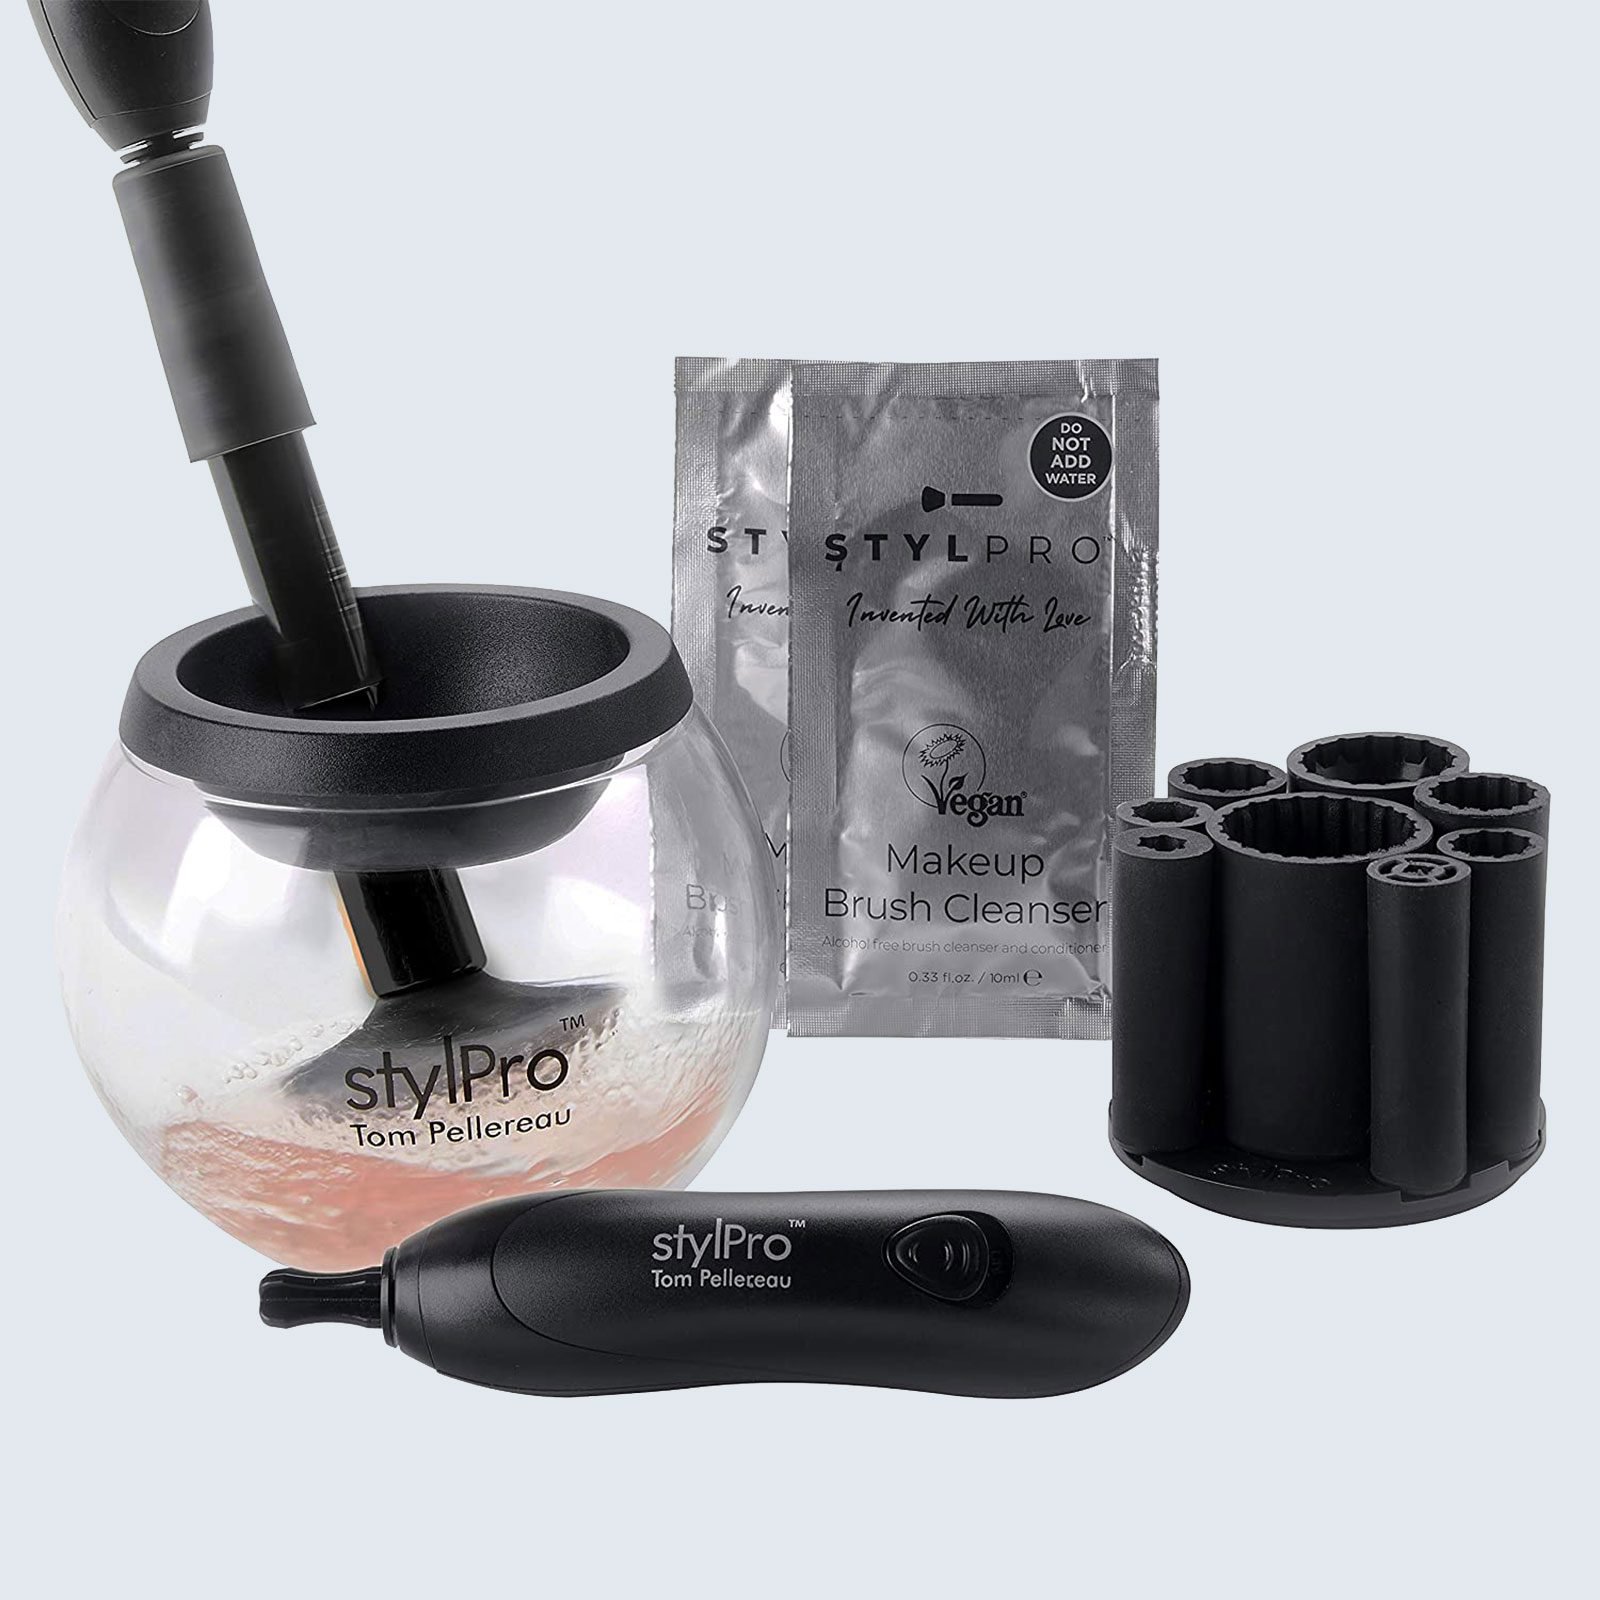 Best electric makeup brush cleaner: StylPro Automatic Makeup Brush Cleaner and Dryer